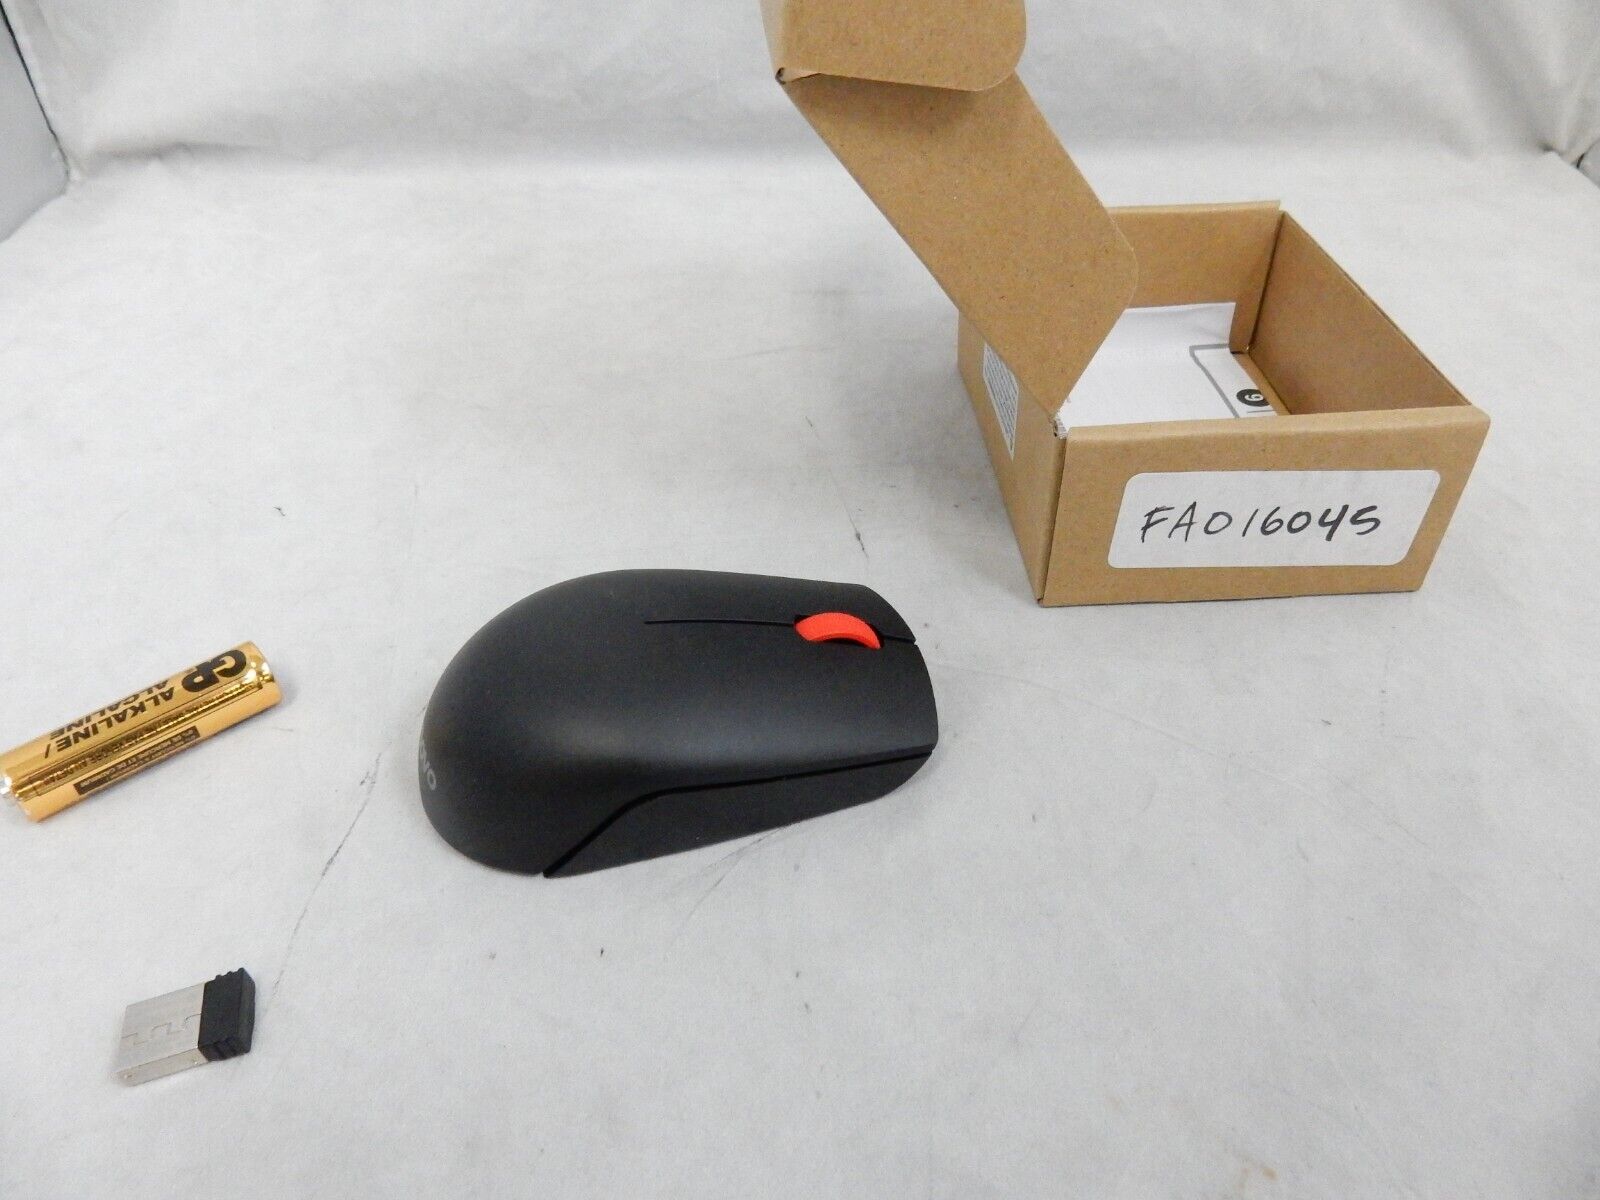 Lenovo Essential Compact Wireless Mouse 4Y50R20864